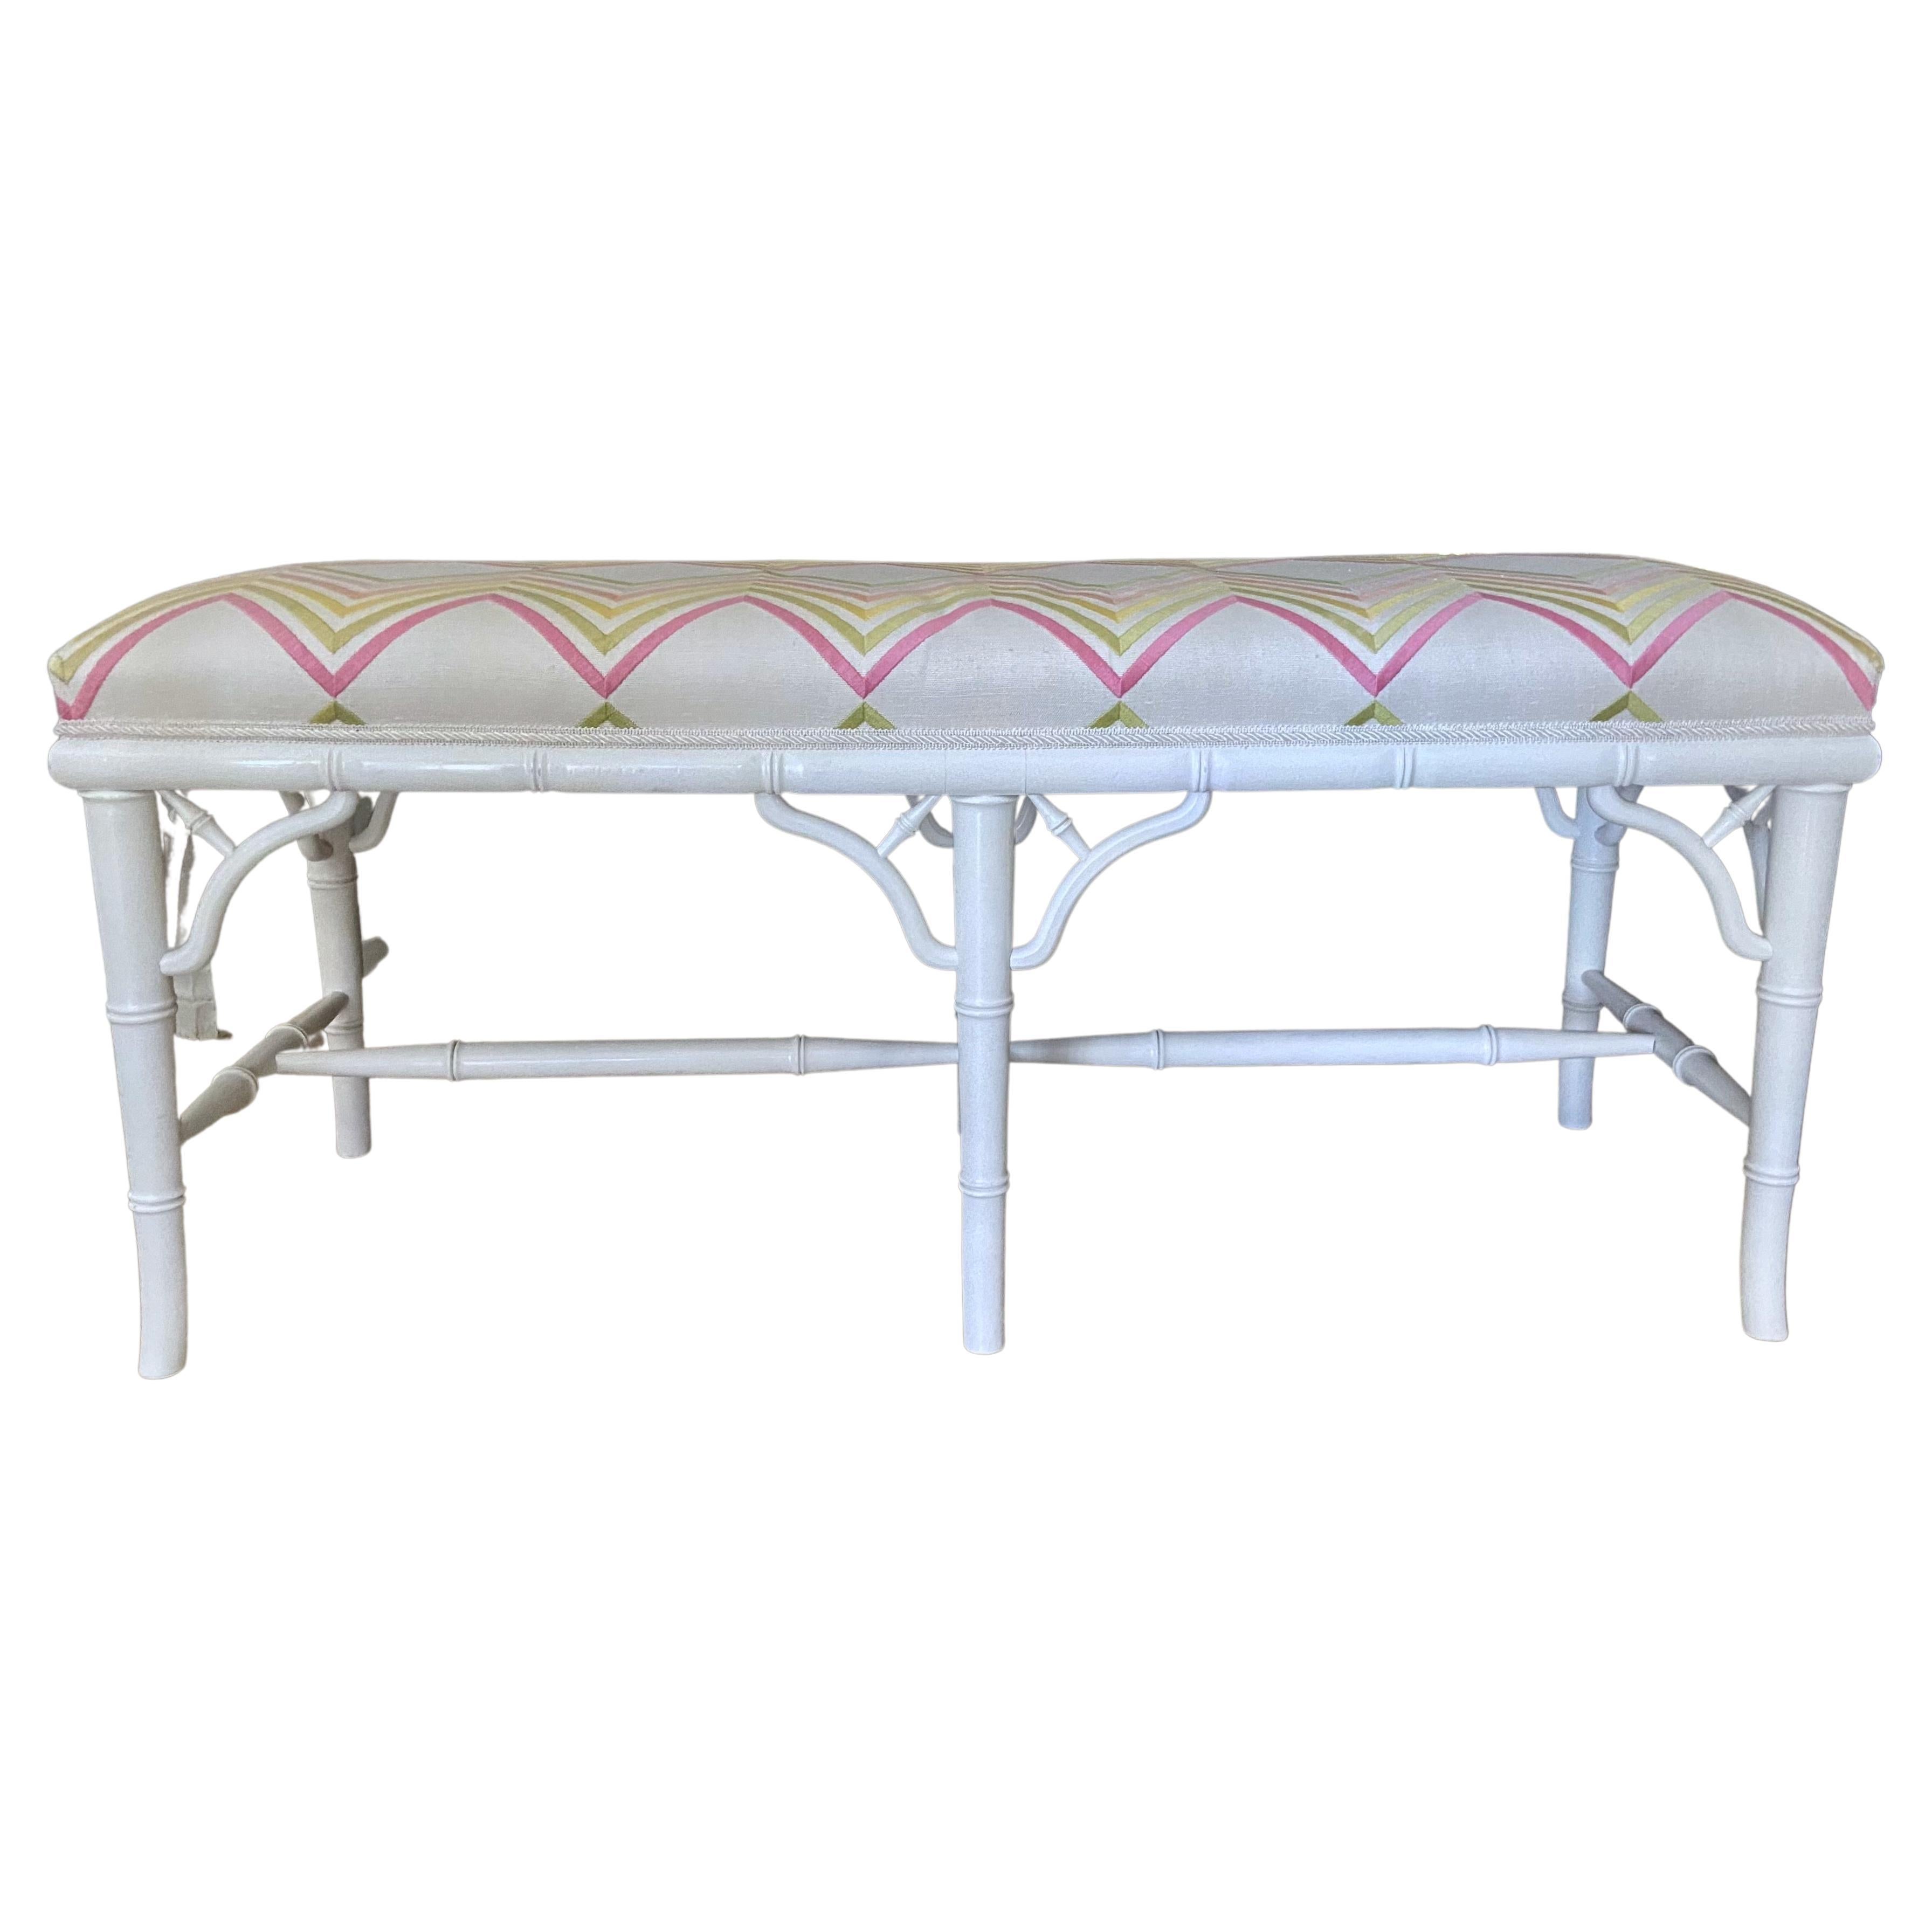 Faux Wood Bamboo White Upholstered Bench For Sale